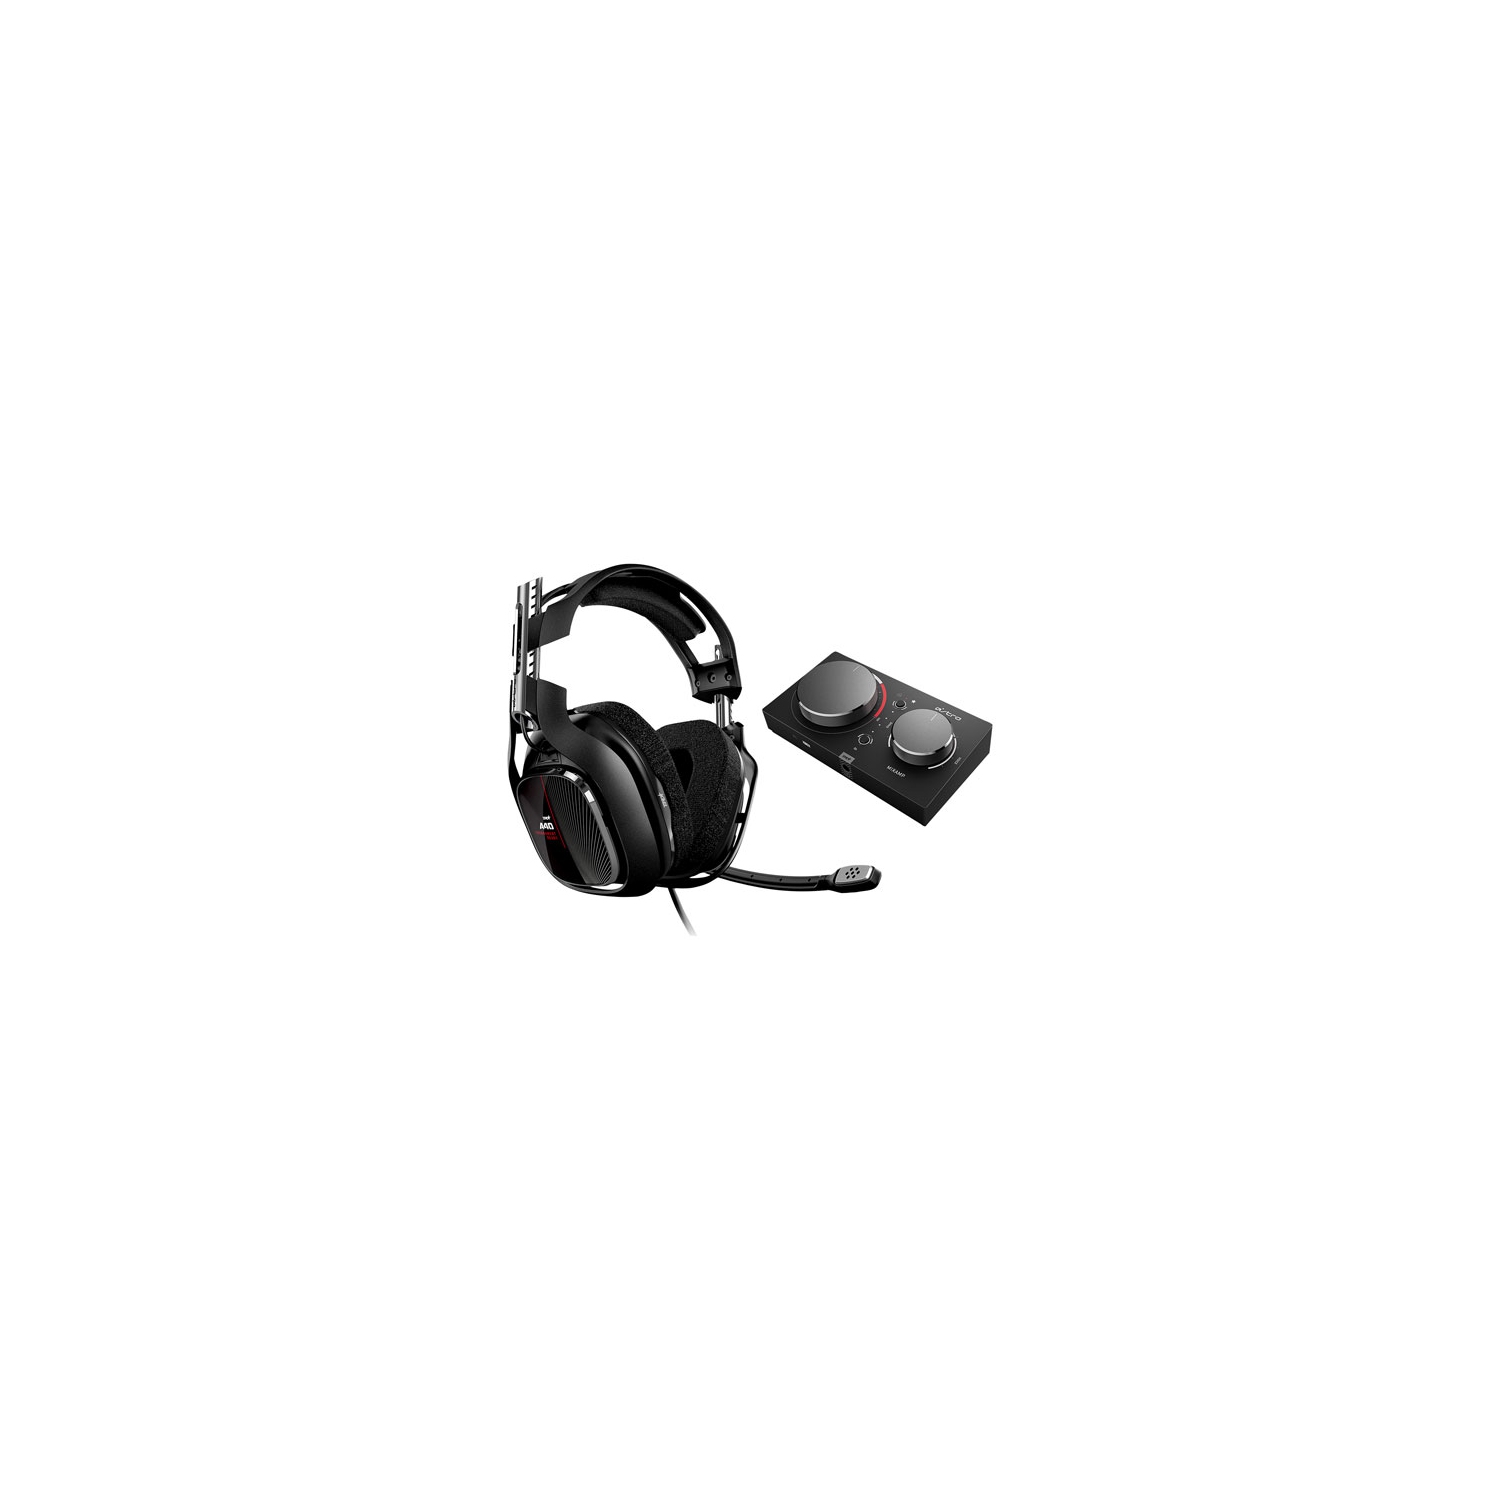 Refurbished (Good) - ASTRO Gaming A40 TR Gaming Headset + MixAmp Pro TR for Xbox One/PC - Black